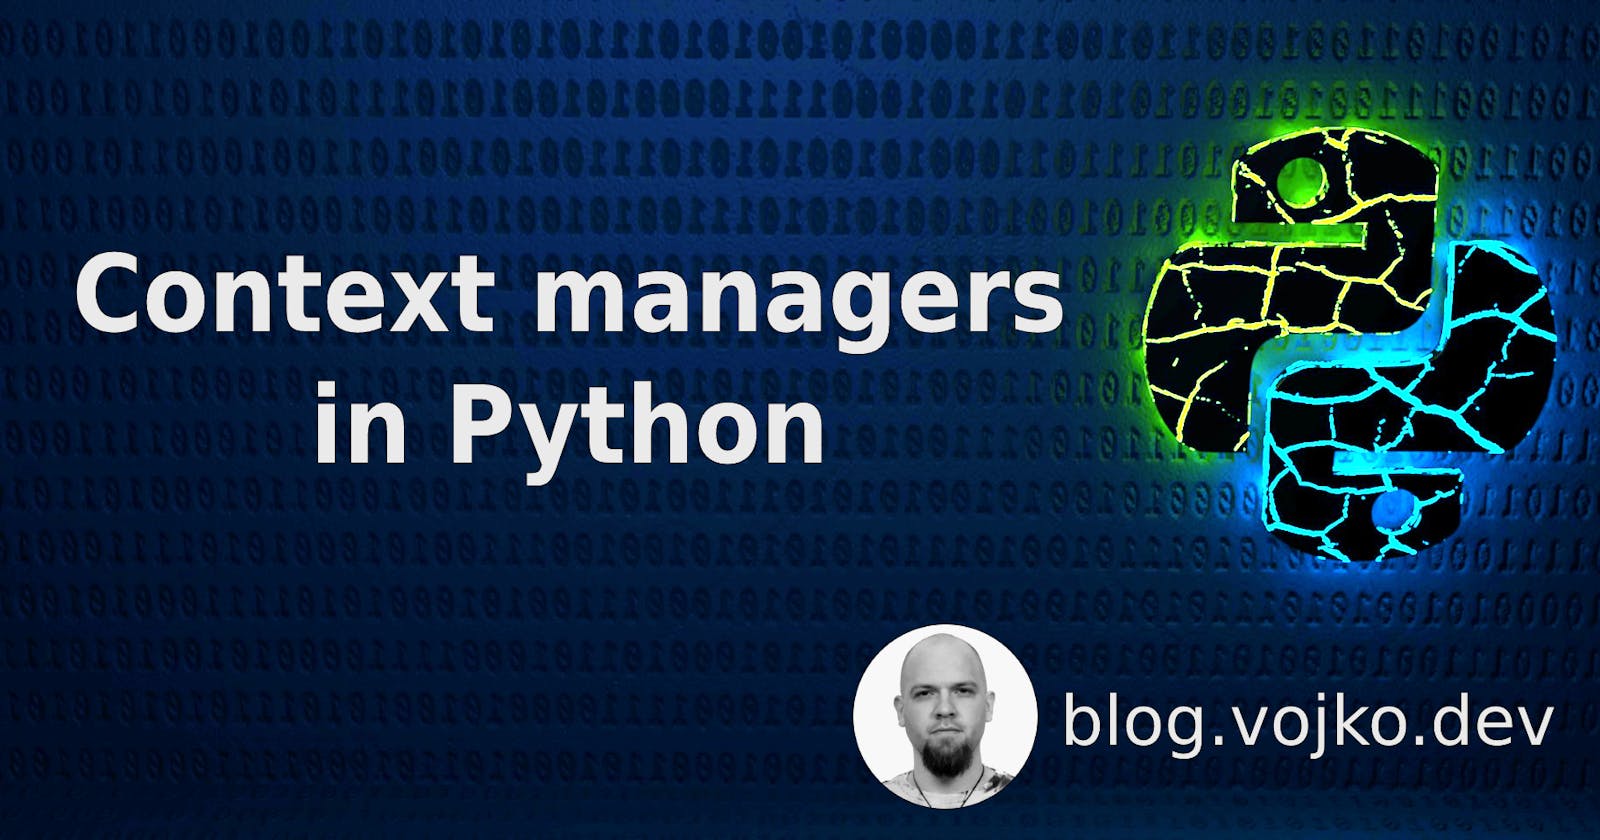 Using context managers in Python